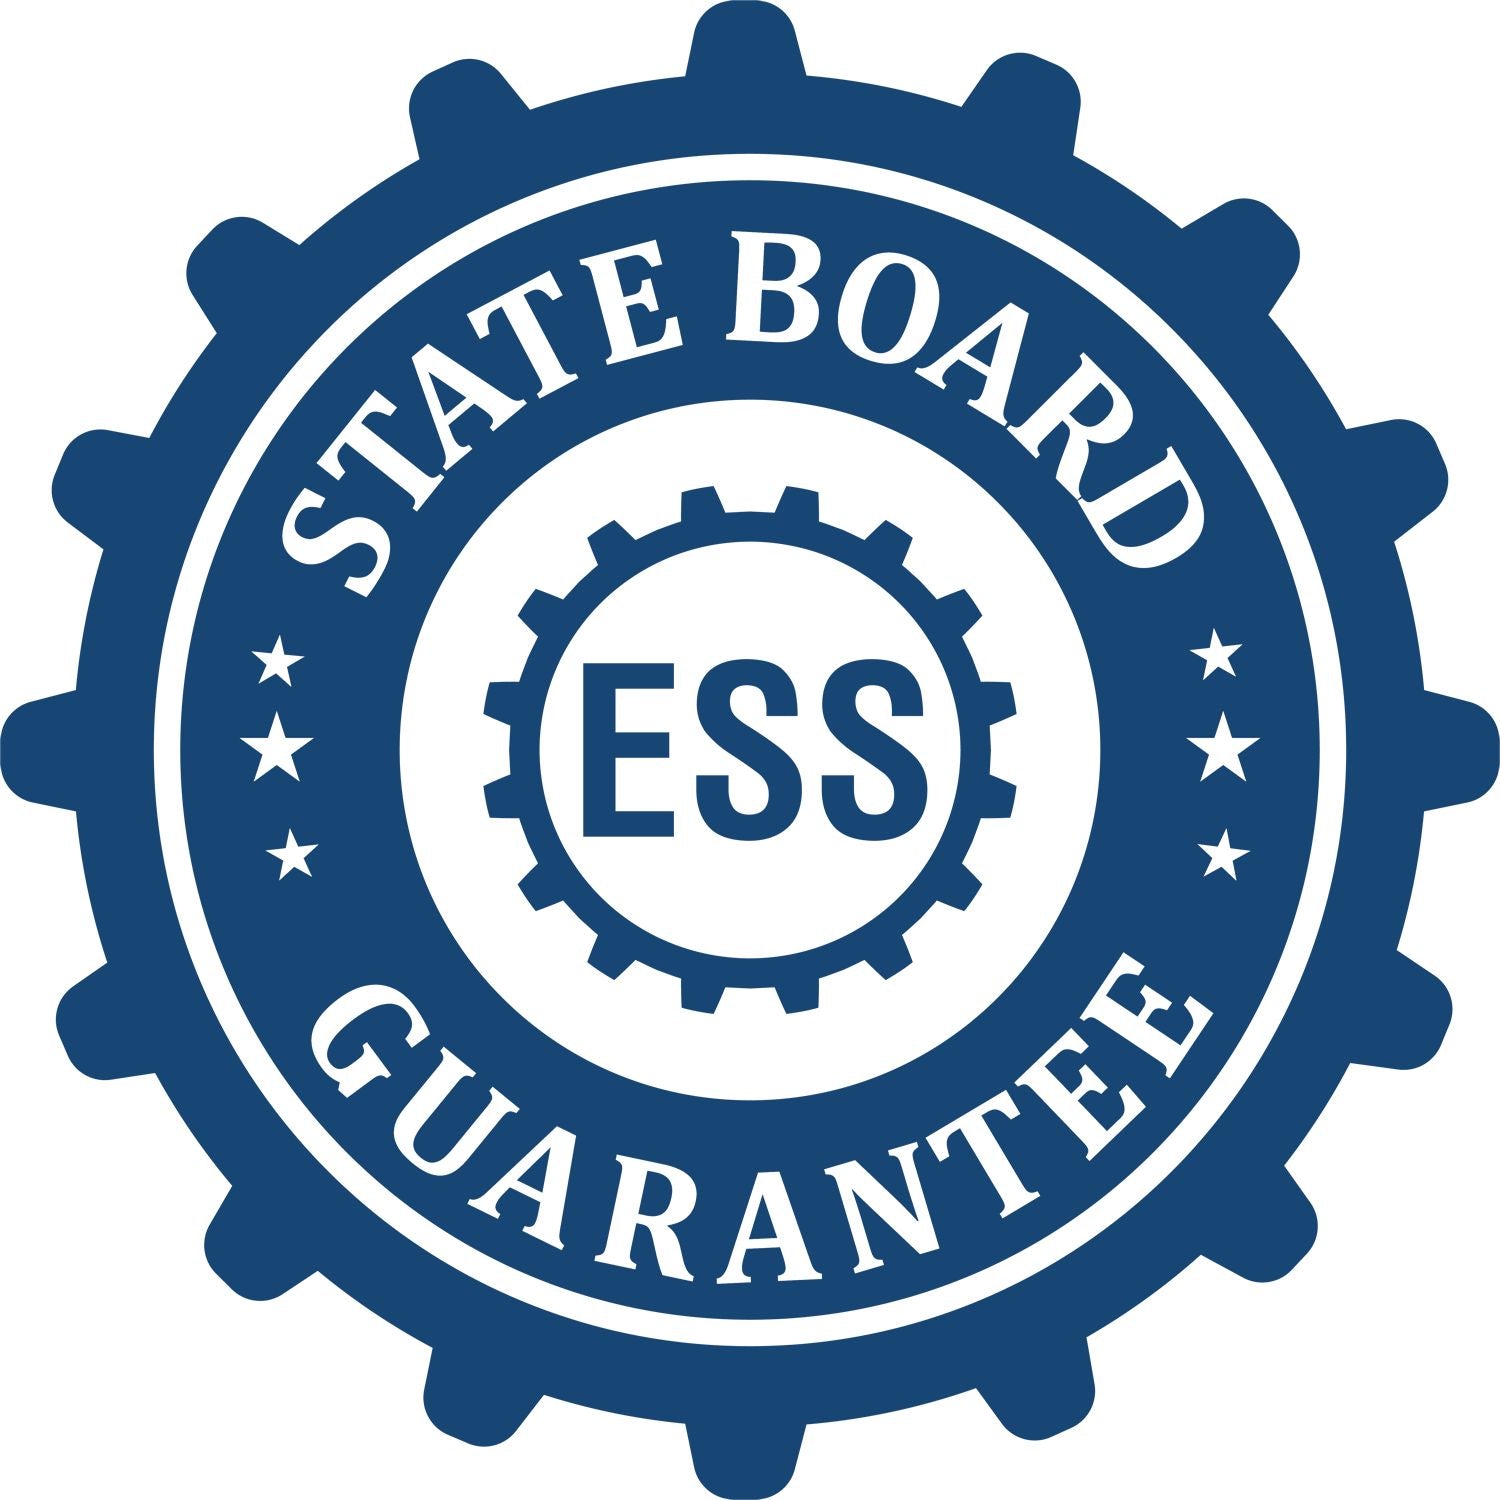 An emblem in a gear shape illustrating a state board guarantee for the Heavy Duty Kentucky Landscape Architect Cast Iron Embosser product.